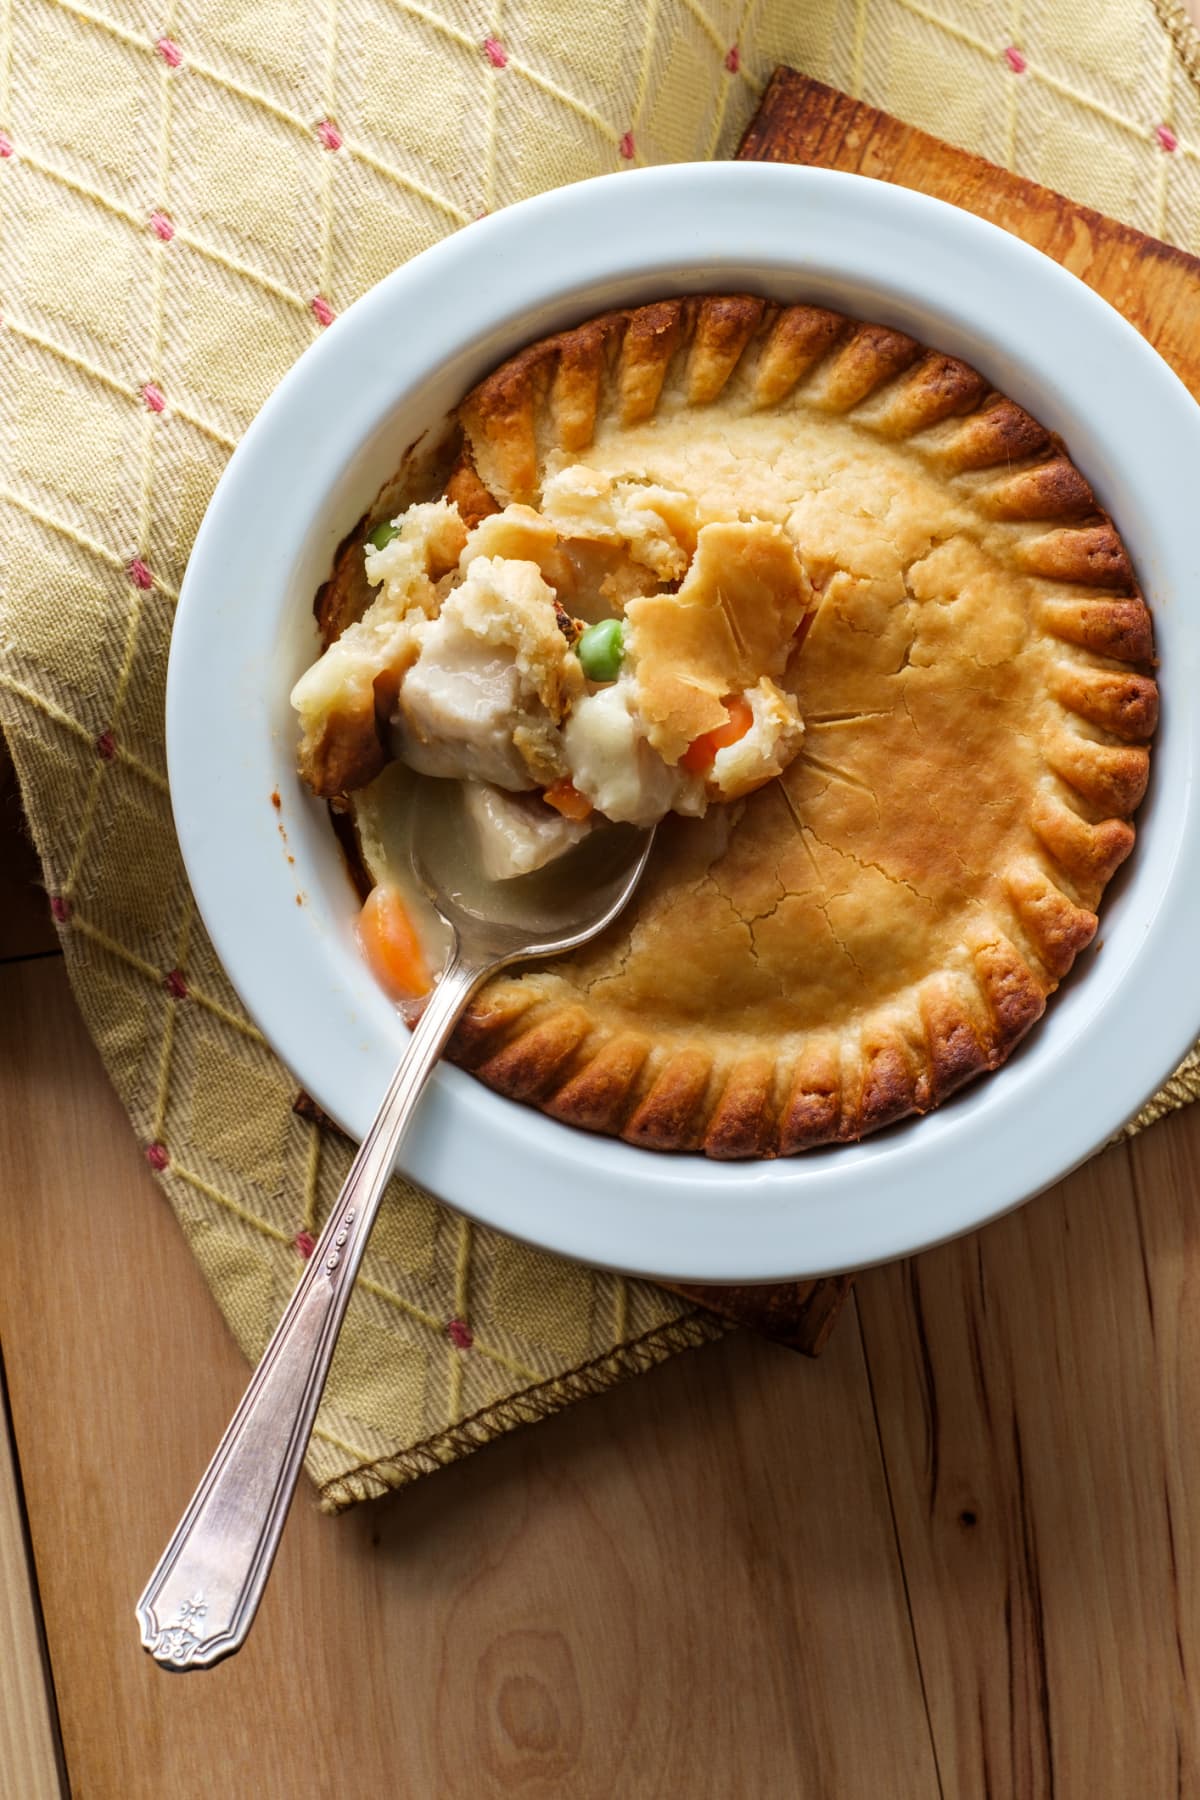 Chicken pot pie with the crust broken by a silver spoon